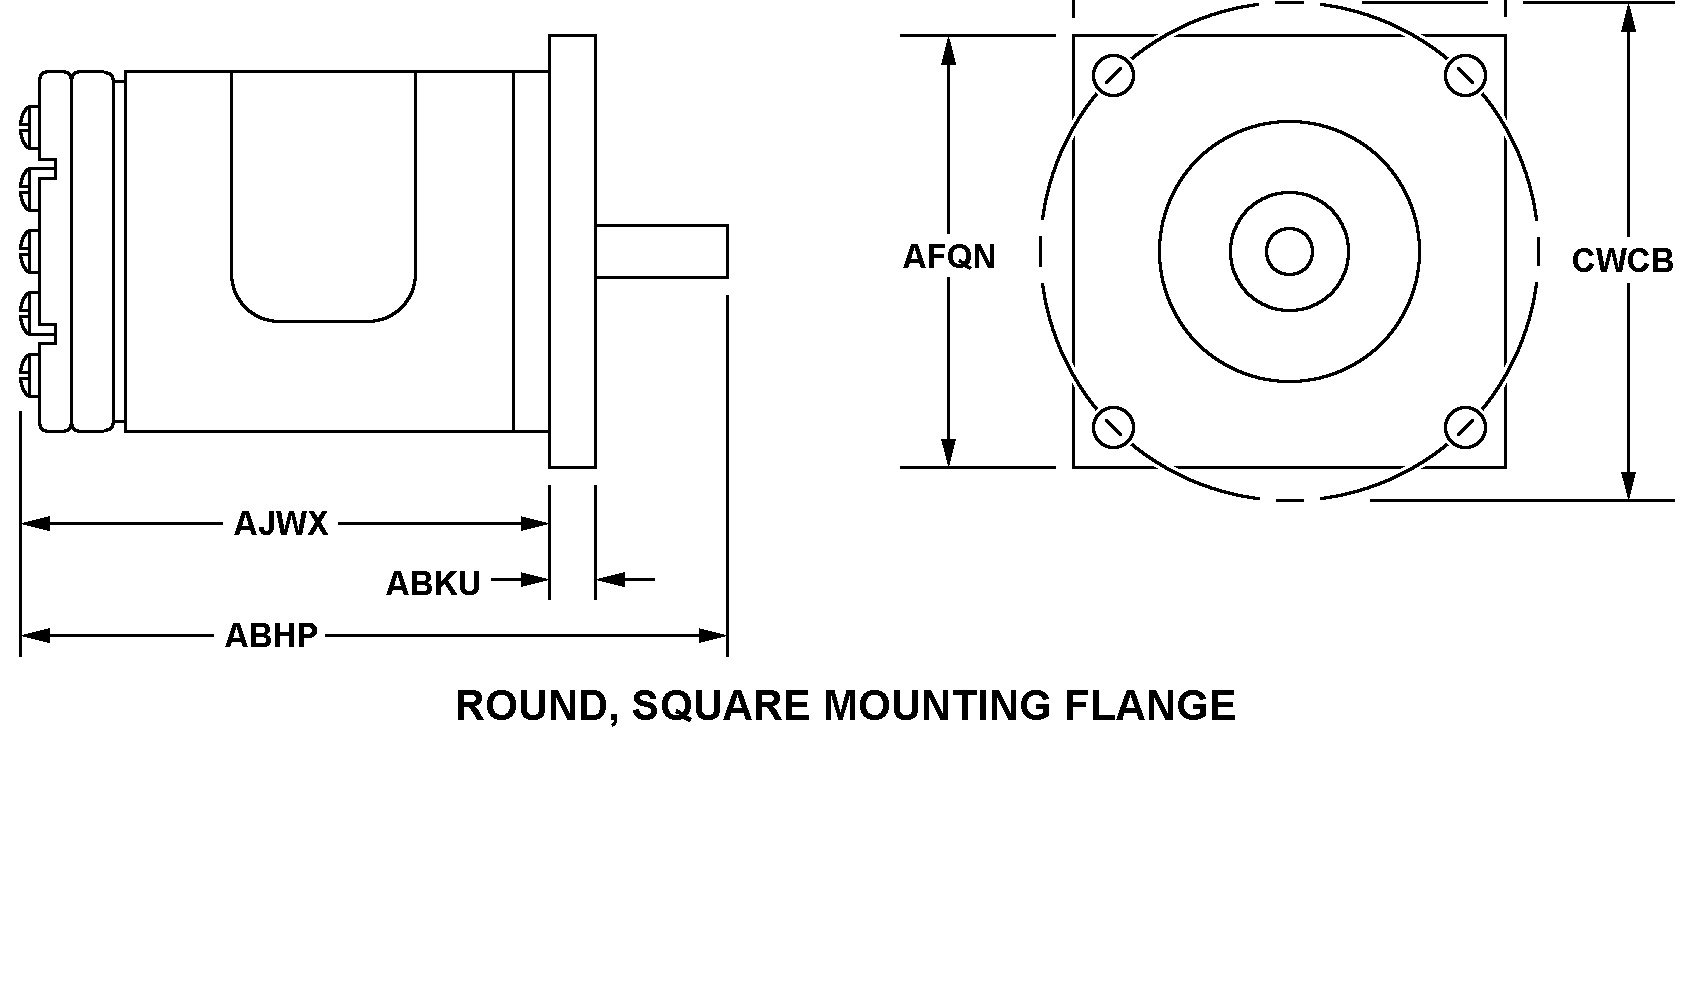 ROUND, SQUARE MOUNTING FLANGE style nsn 5990-01-027-1869